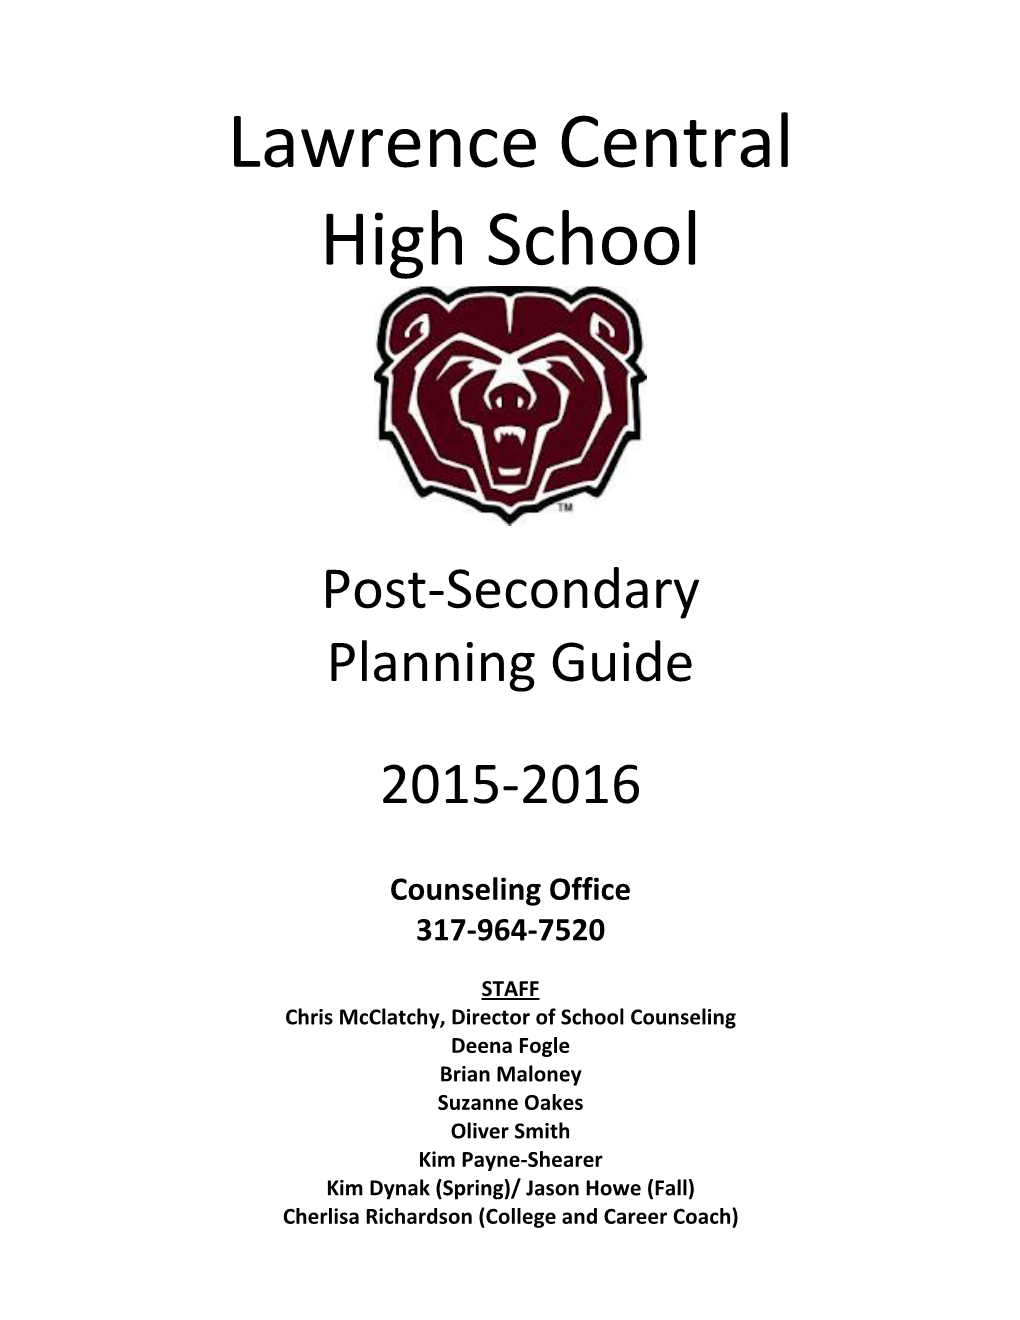 Post-Secondary Planning Guide 2015-2016